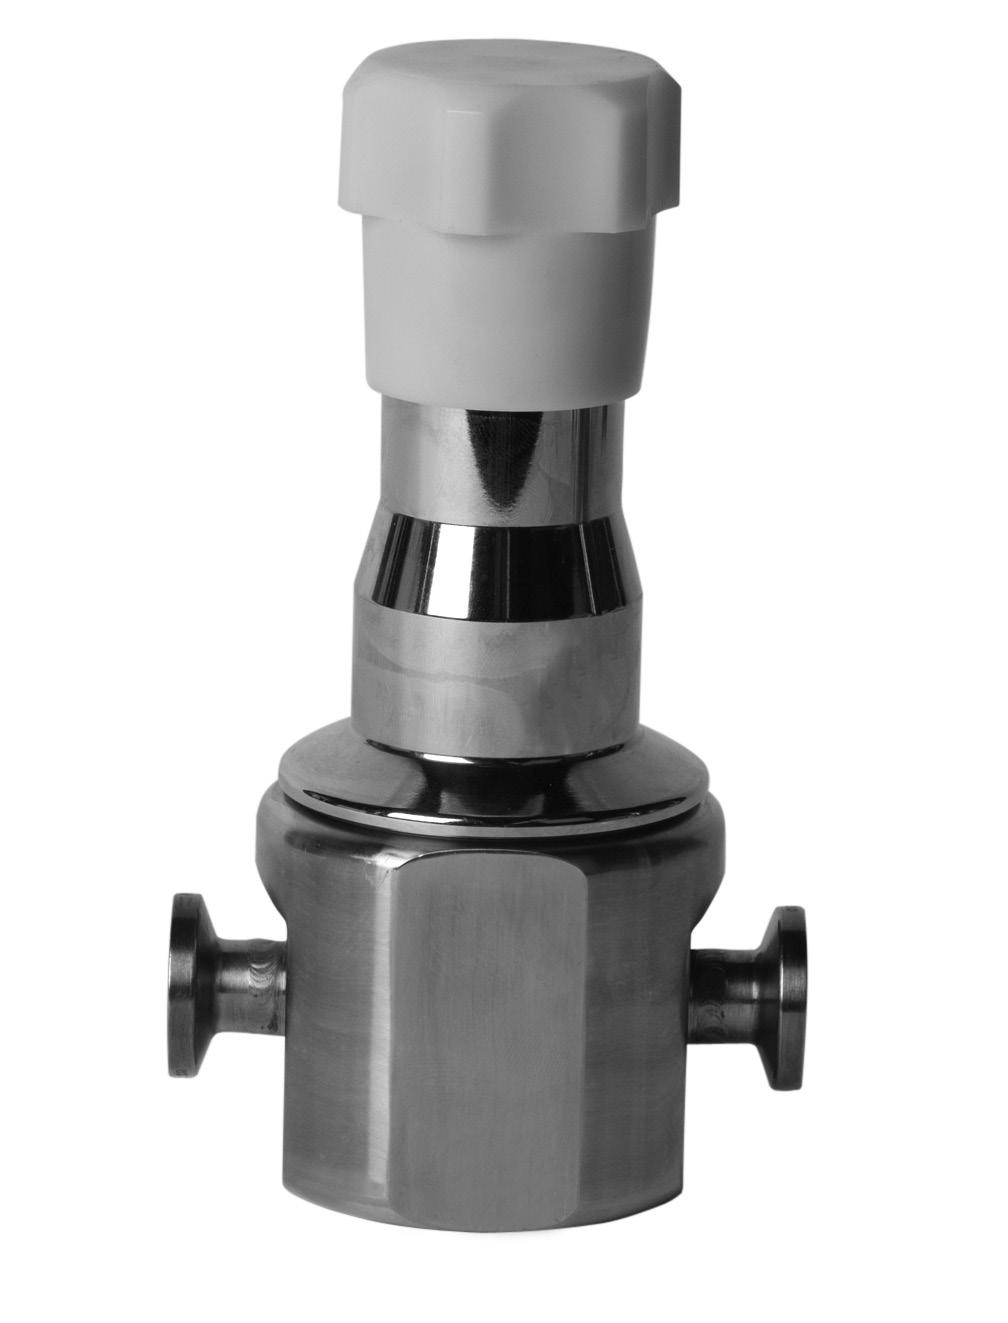 3L/T-2R/S33 Series JS Series Compact, High Purity ack Pressure Regulating Valve J-Pure is the first fully drainable compact back pressure regulator designed and built specifically for hygienic, ASME